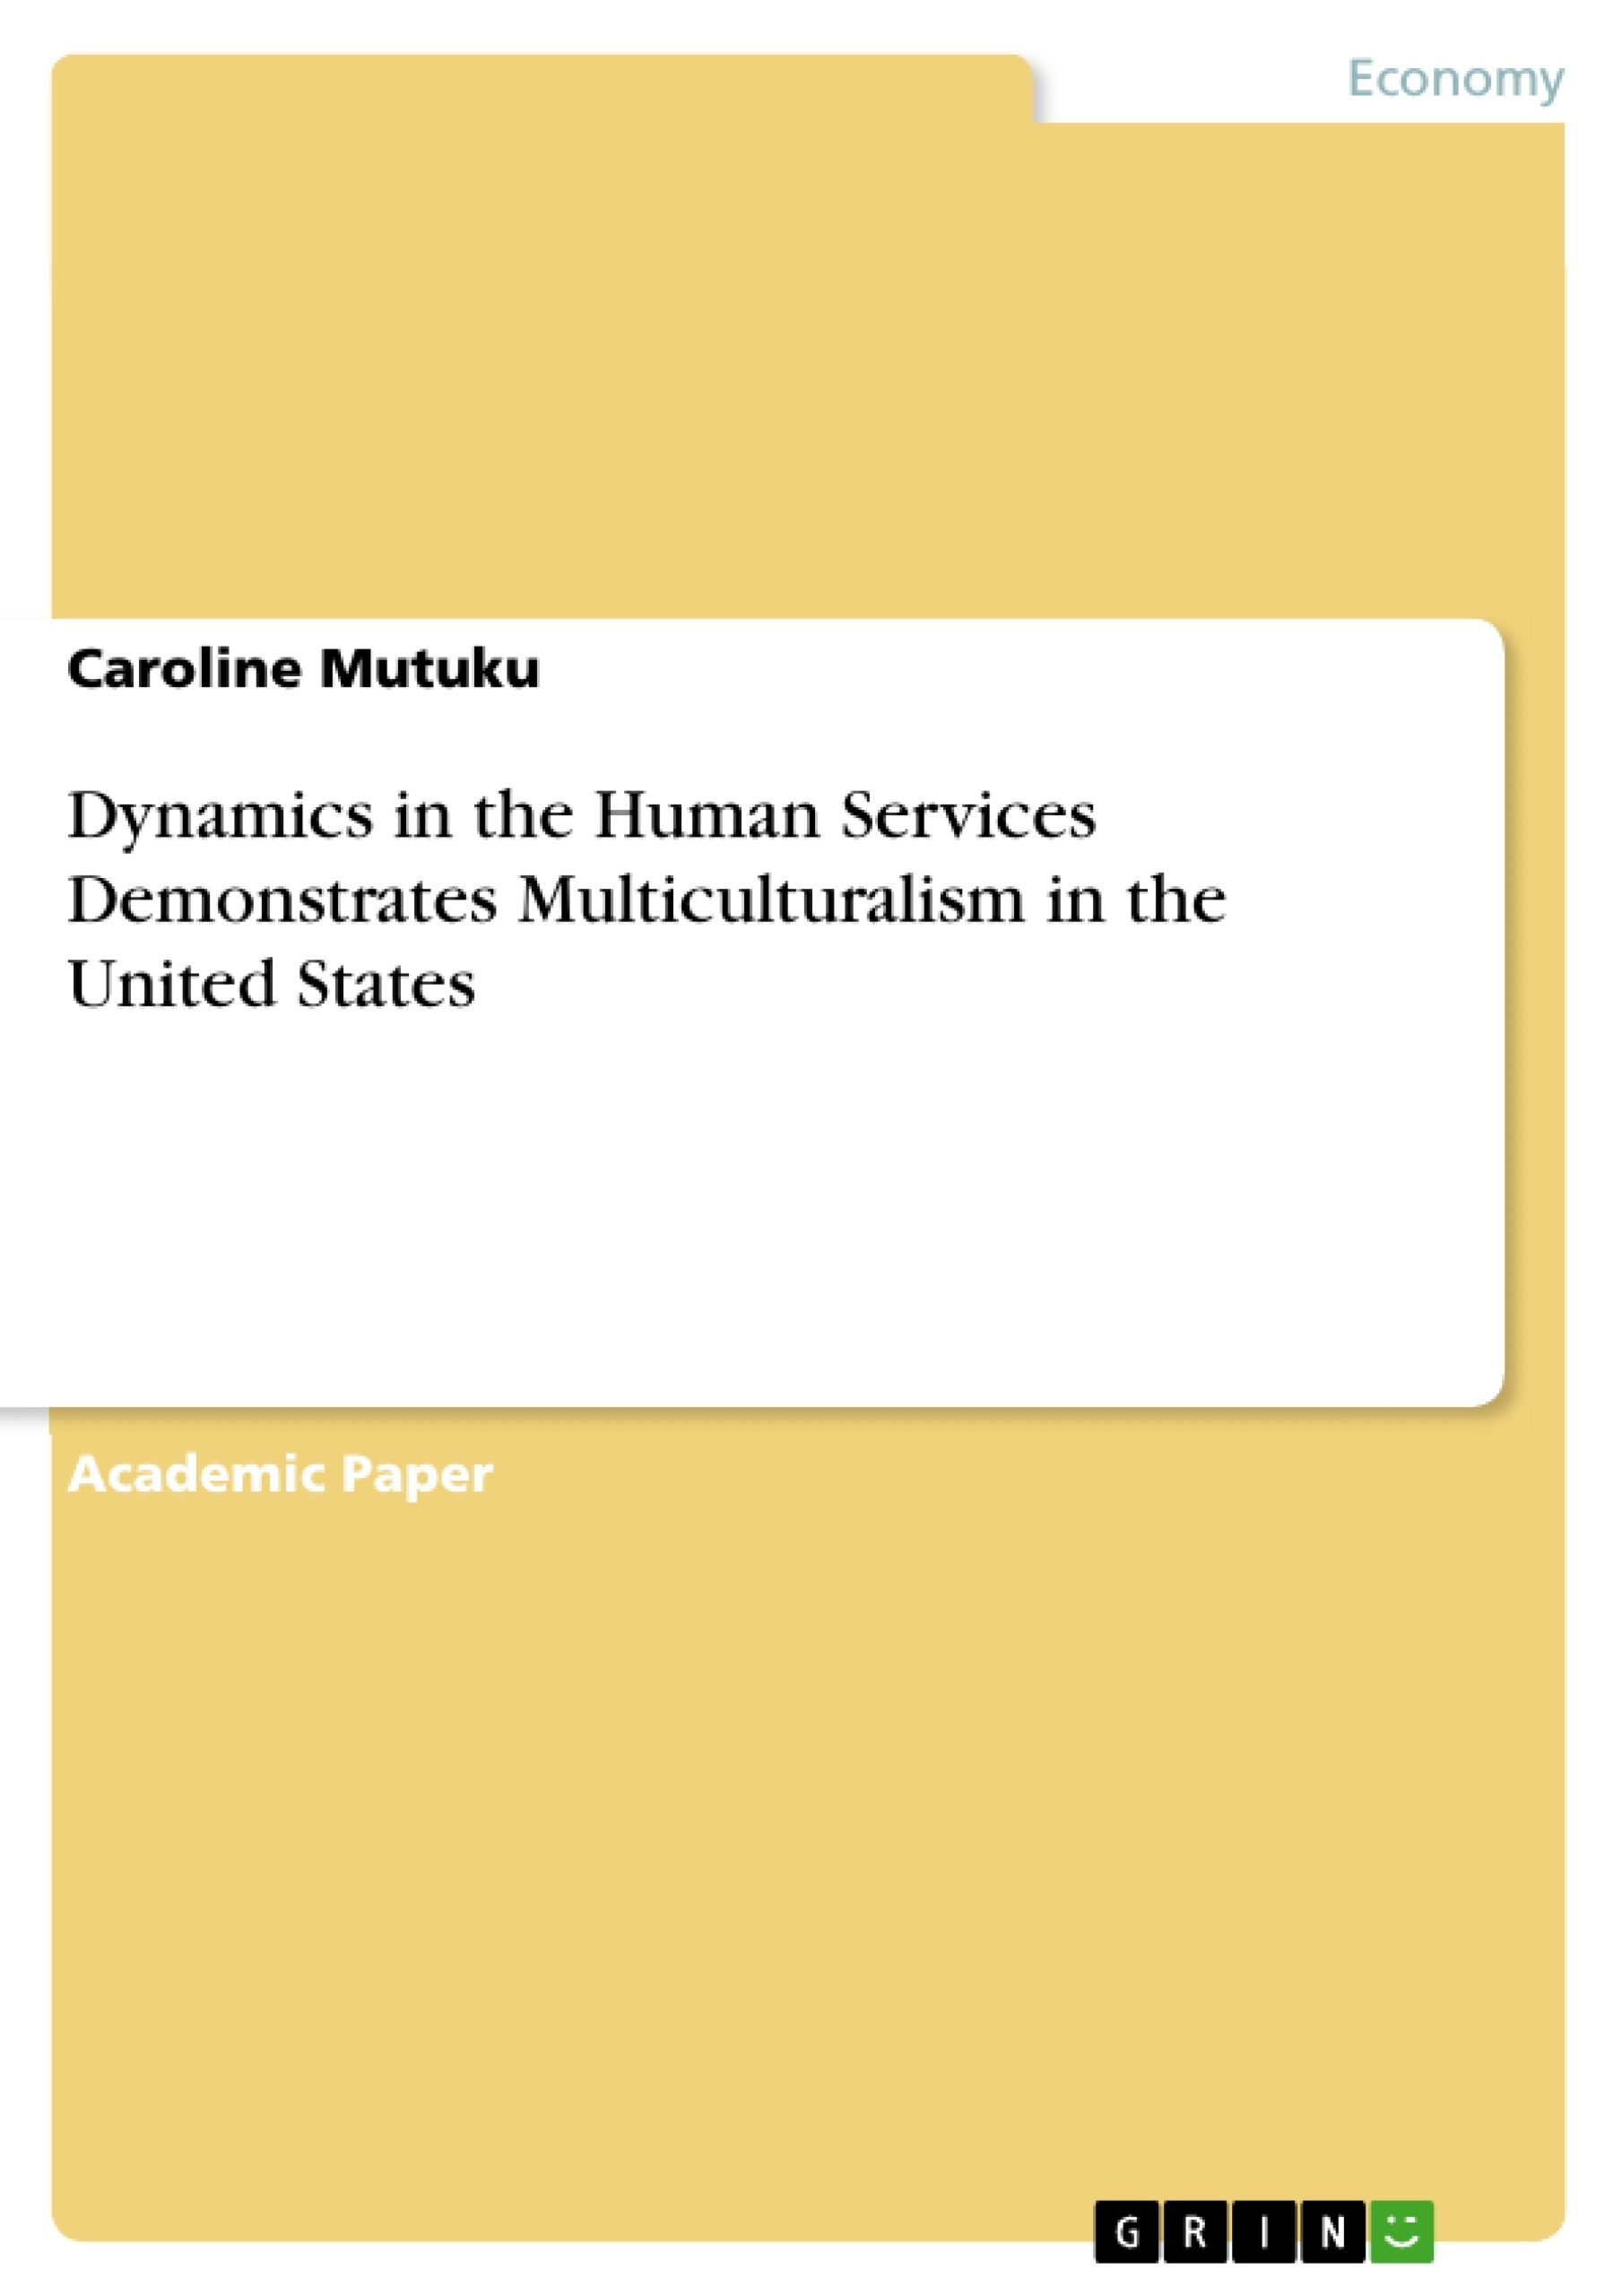 Title: Dynamics in the Human Services Demonstrates Multiculturalism in the United States